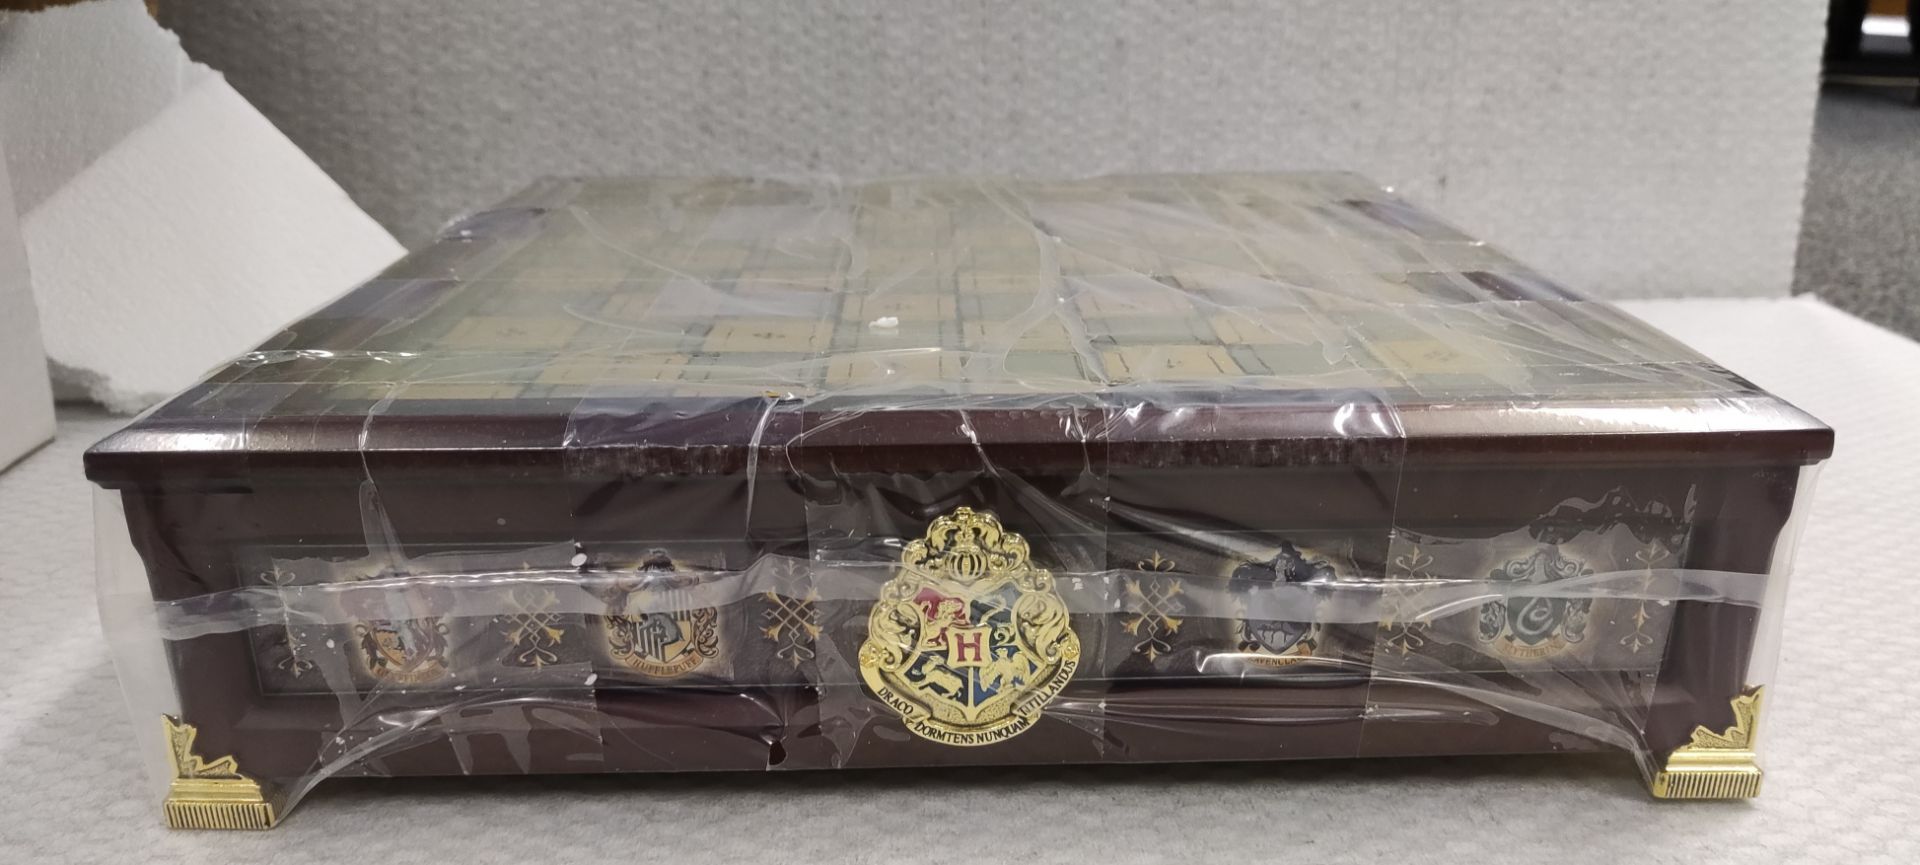 1 x Harry Potter Silver & Gold Plated Quidditch Chess Set by The Noble Collection - New/Boxed - Image 8 of 11